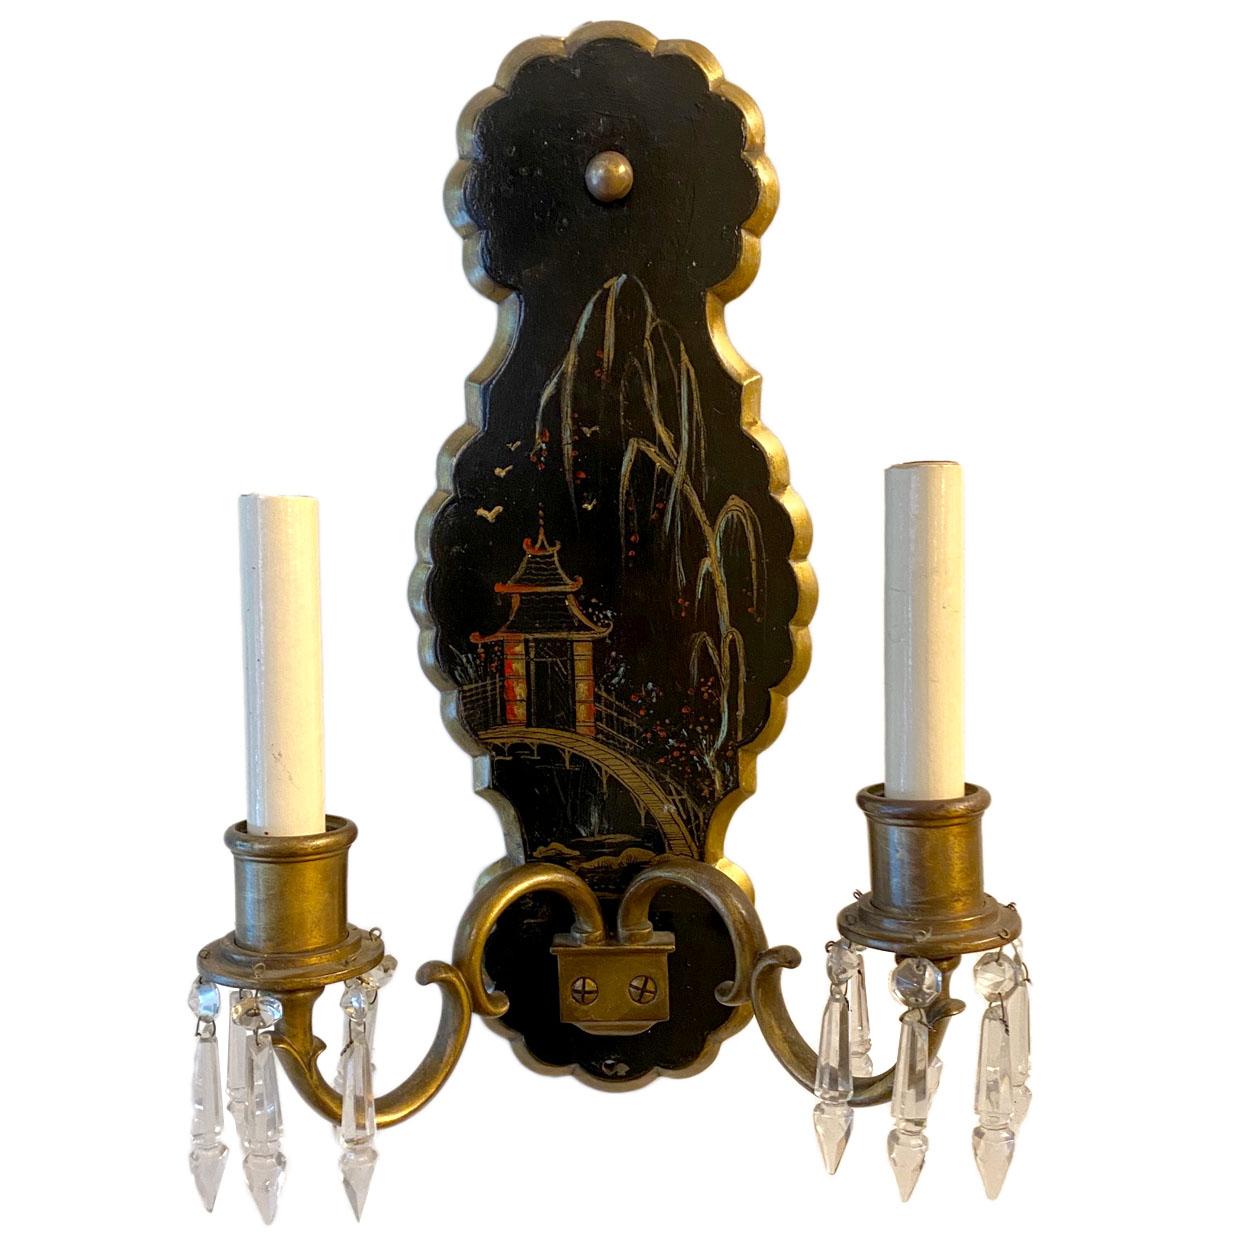 A pair of circa 1920s English hand painted chinoiserie bronze sconces.
Measurements:
Height 15